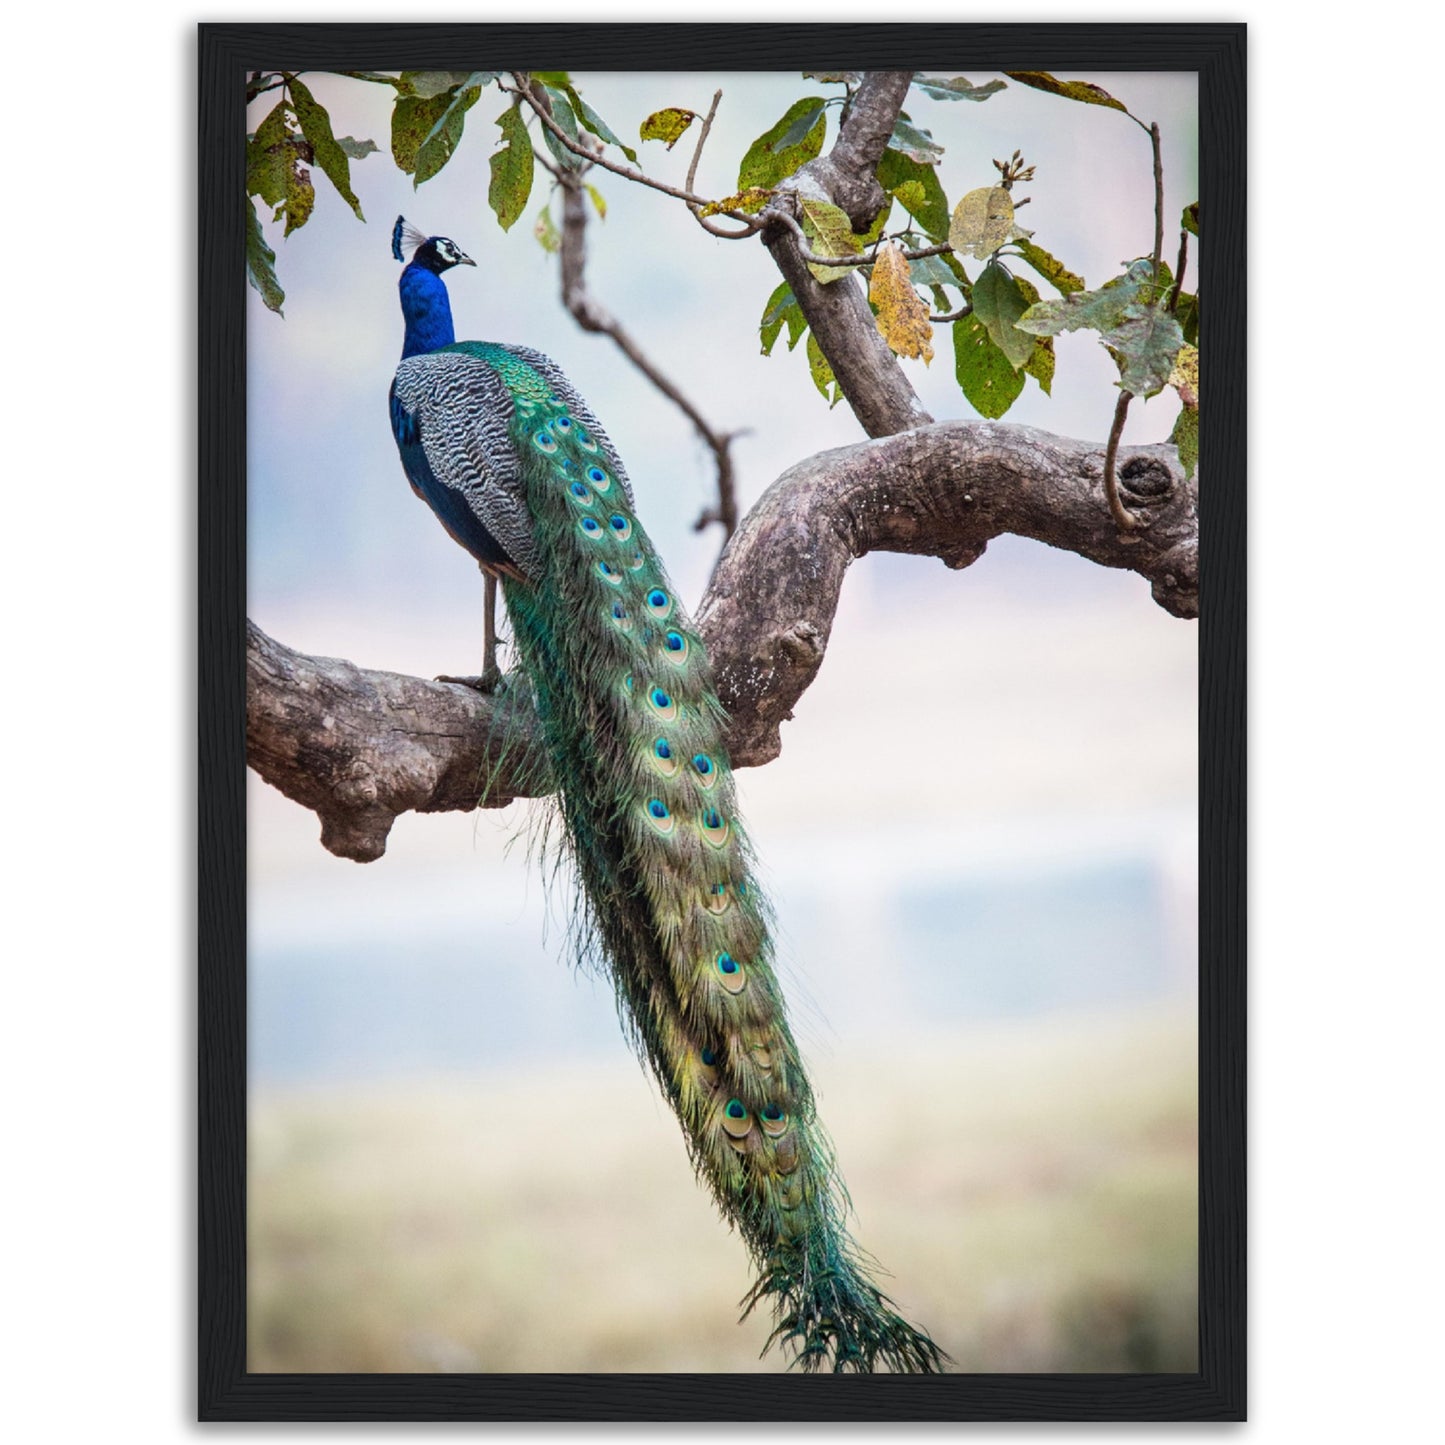 Peacock in a Tree Print